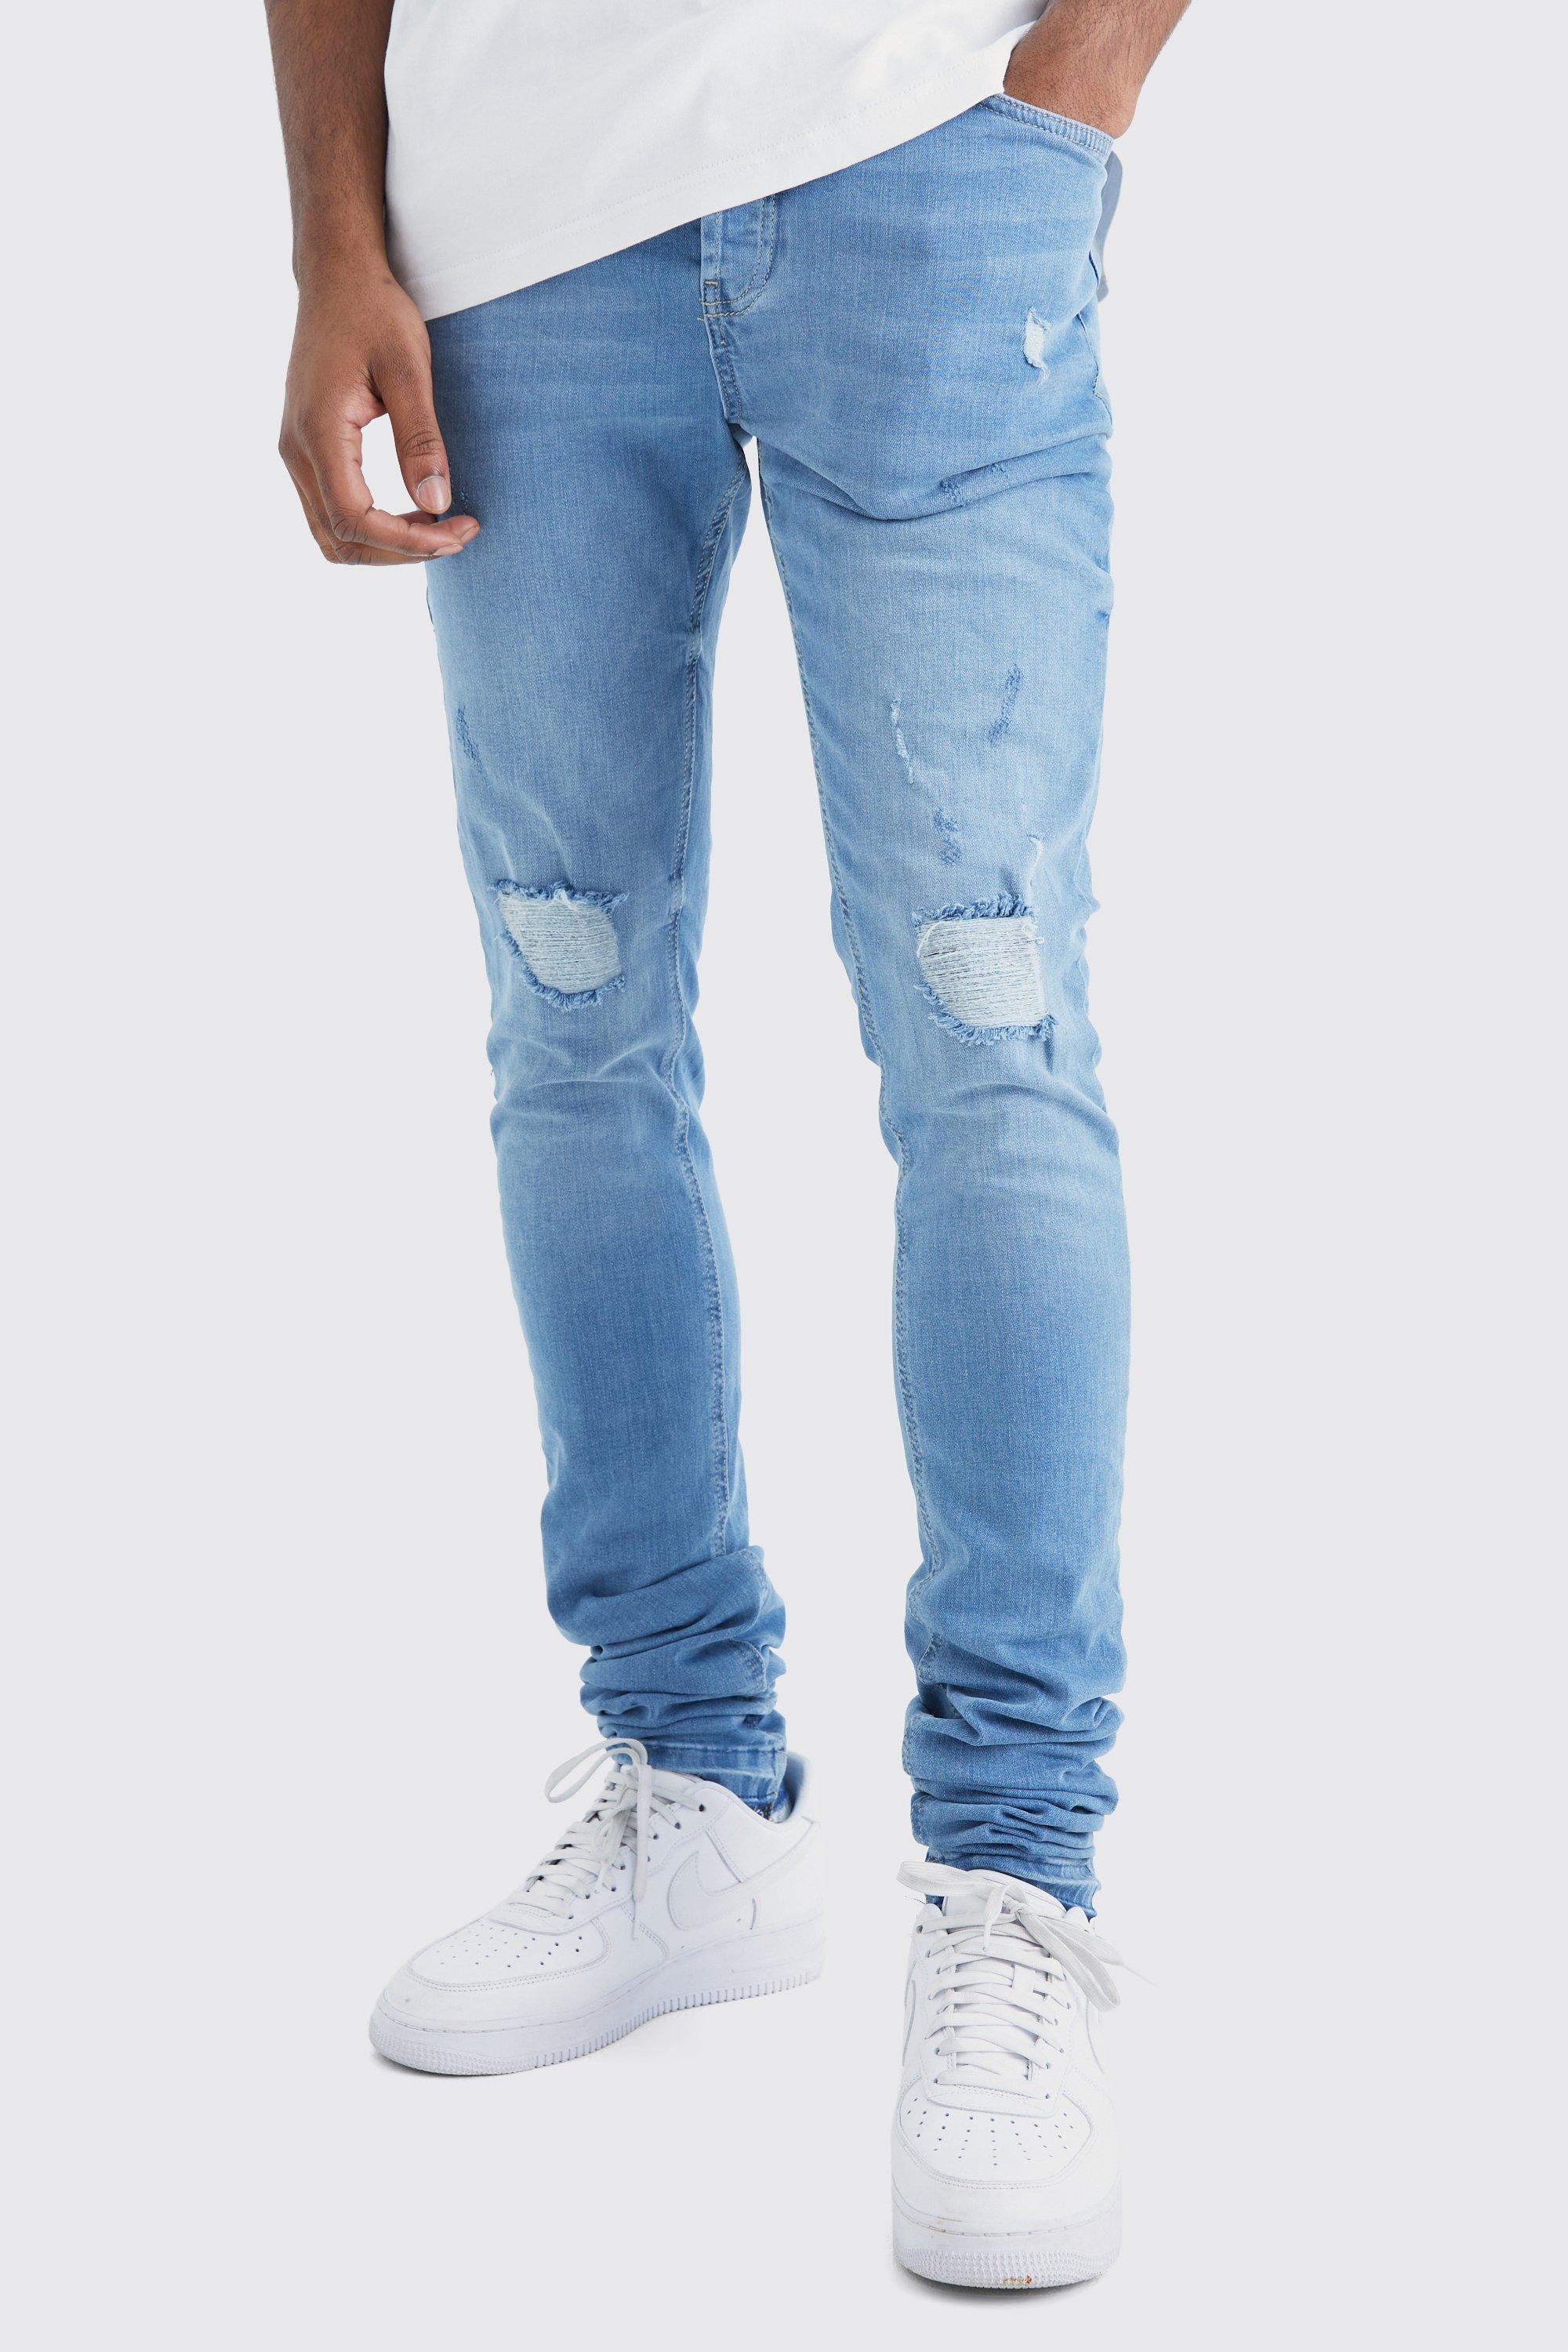 Mens Blue Tall Skinny Stacked Distressed Ripped Let Down Hem Jean, Blue